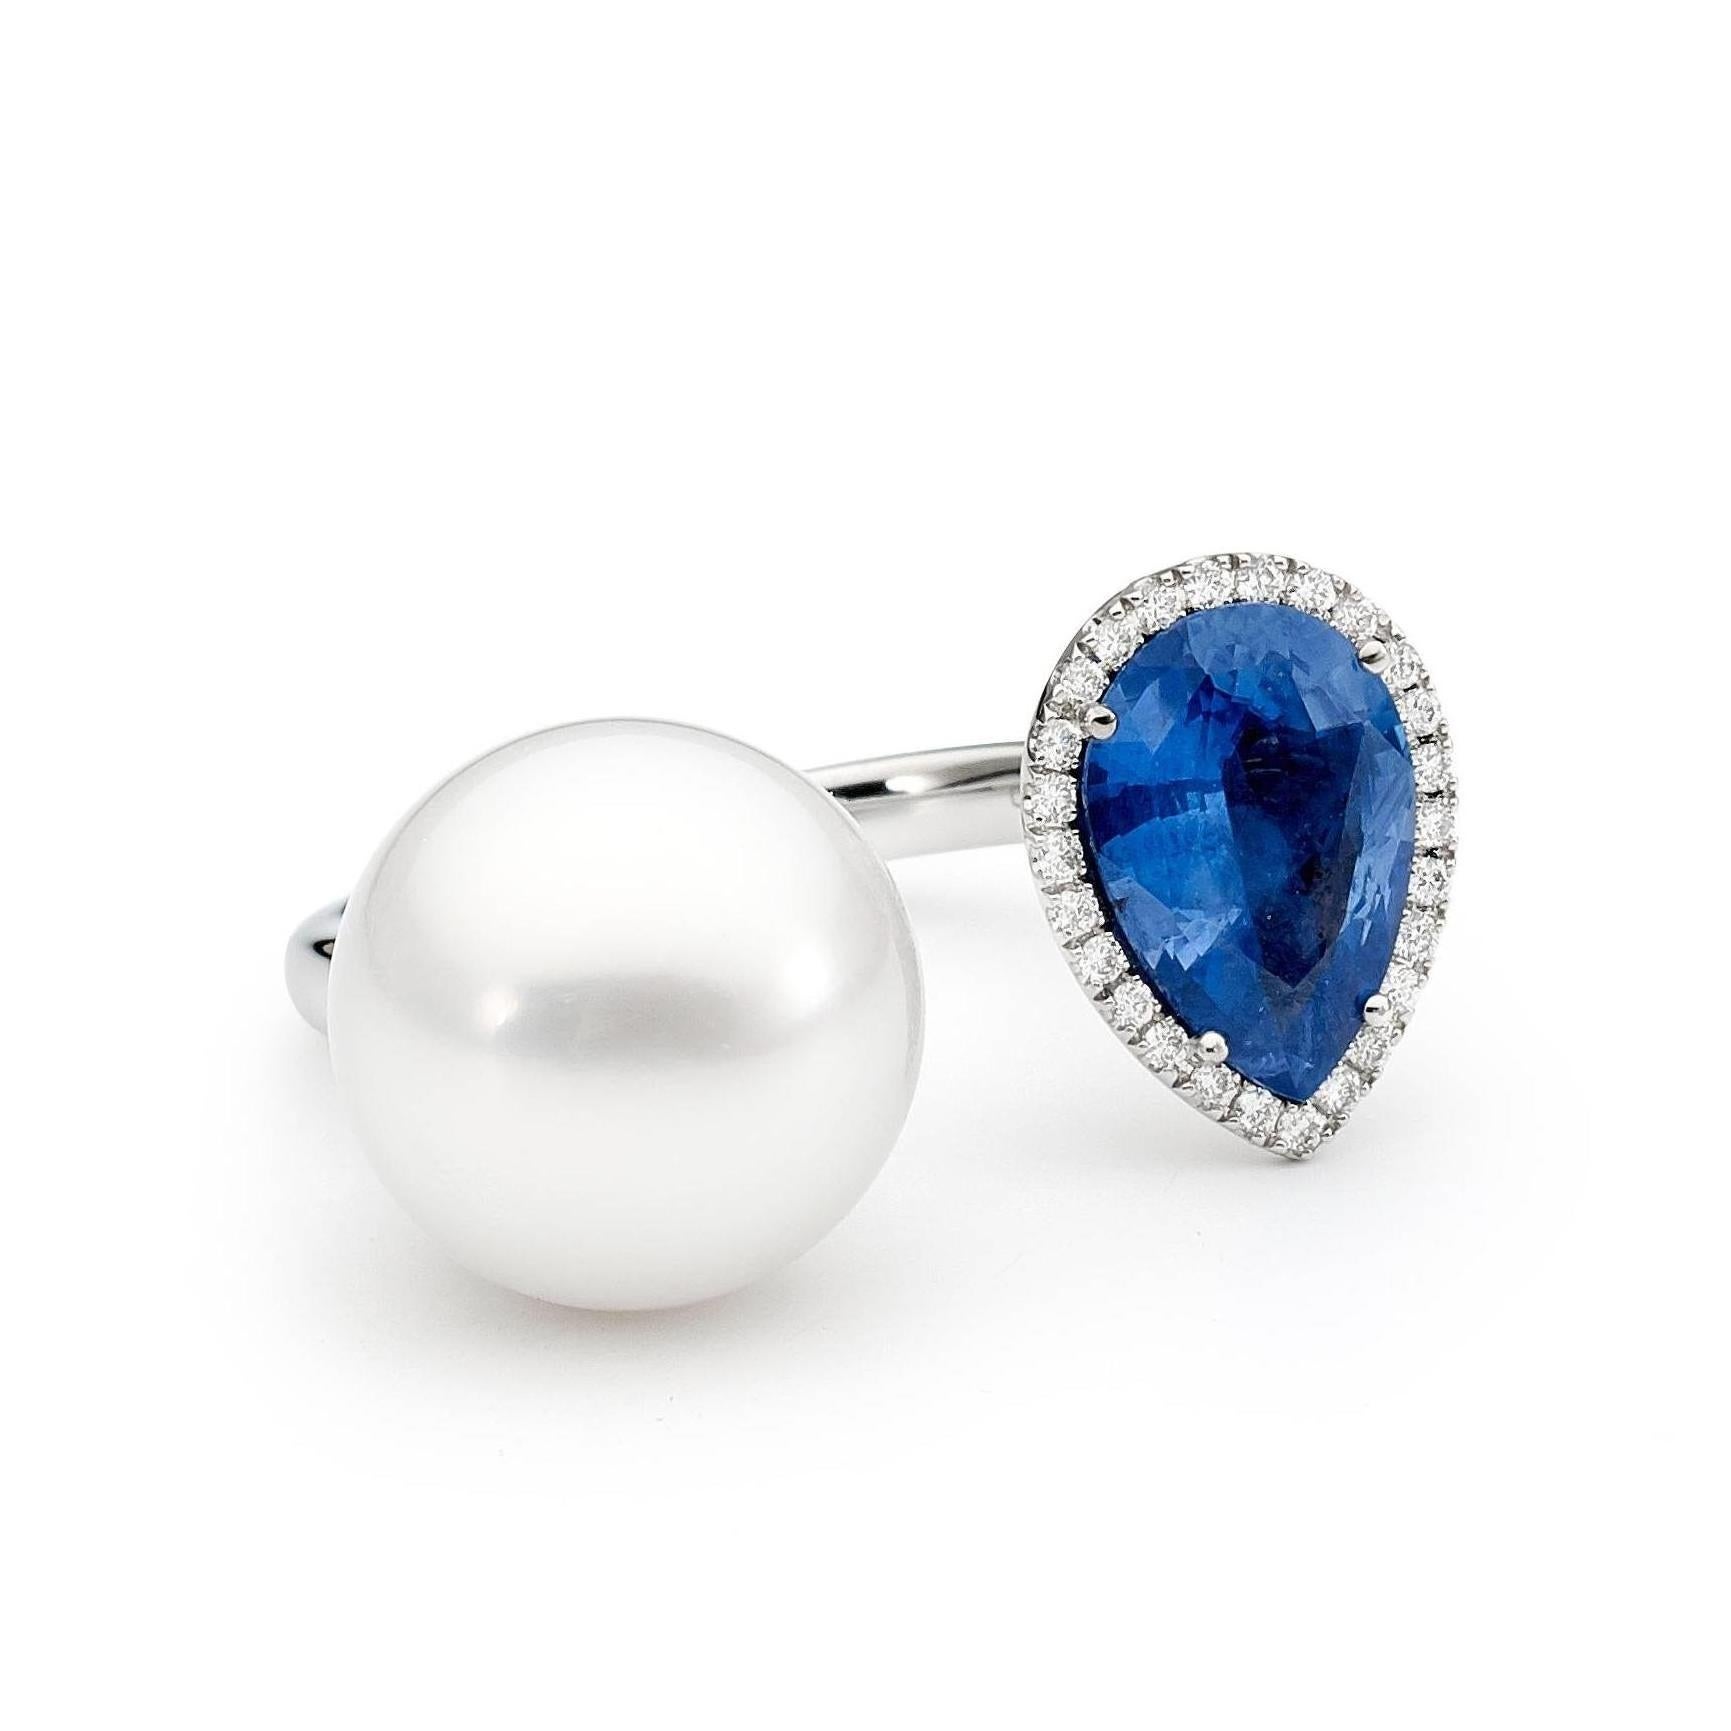 A timeless yet modern Open design Ring set with a stunning 2.32 ct Pear Shaped Blue Sapphire, encased by a halo of 26 fine white diamonds (weighing 0.13ct color H / SI1) and accompanied by a gorgeous 12mm White South Sea Pearl set into 18ct white